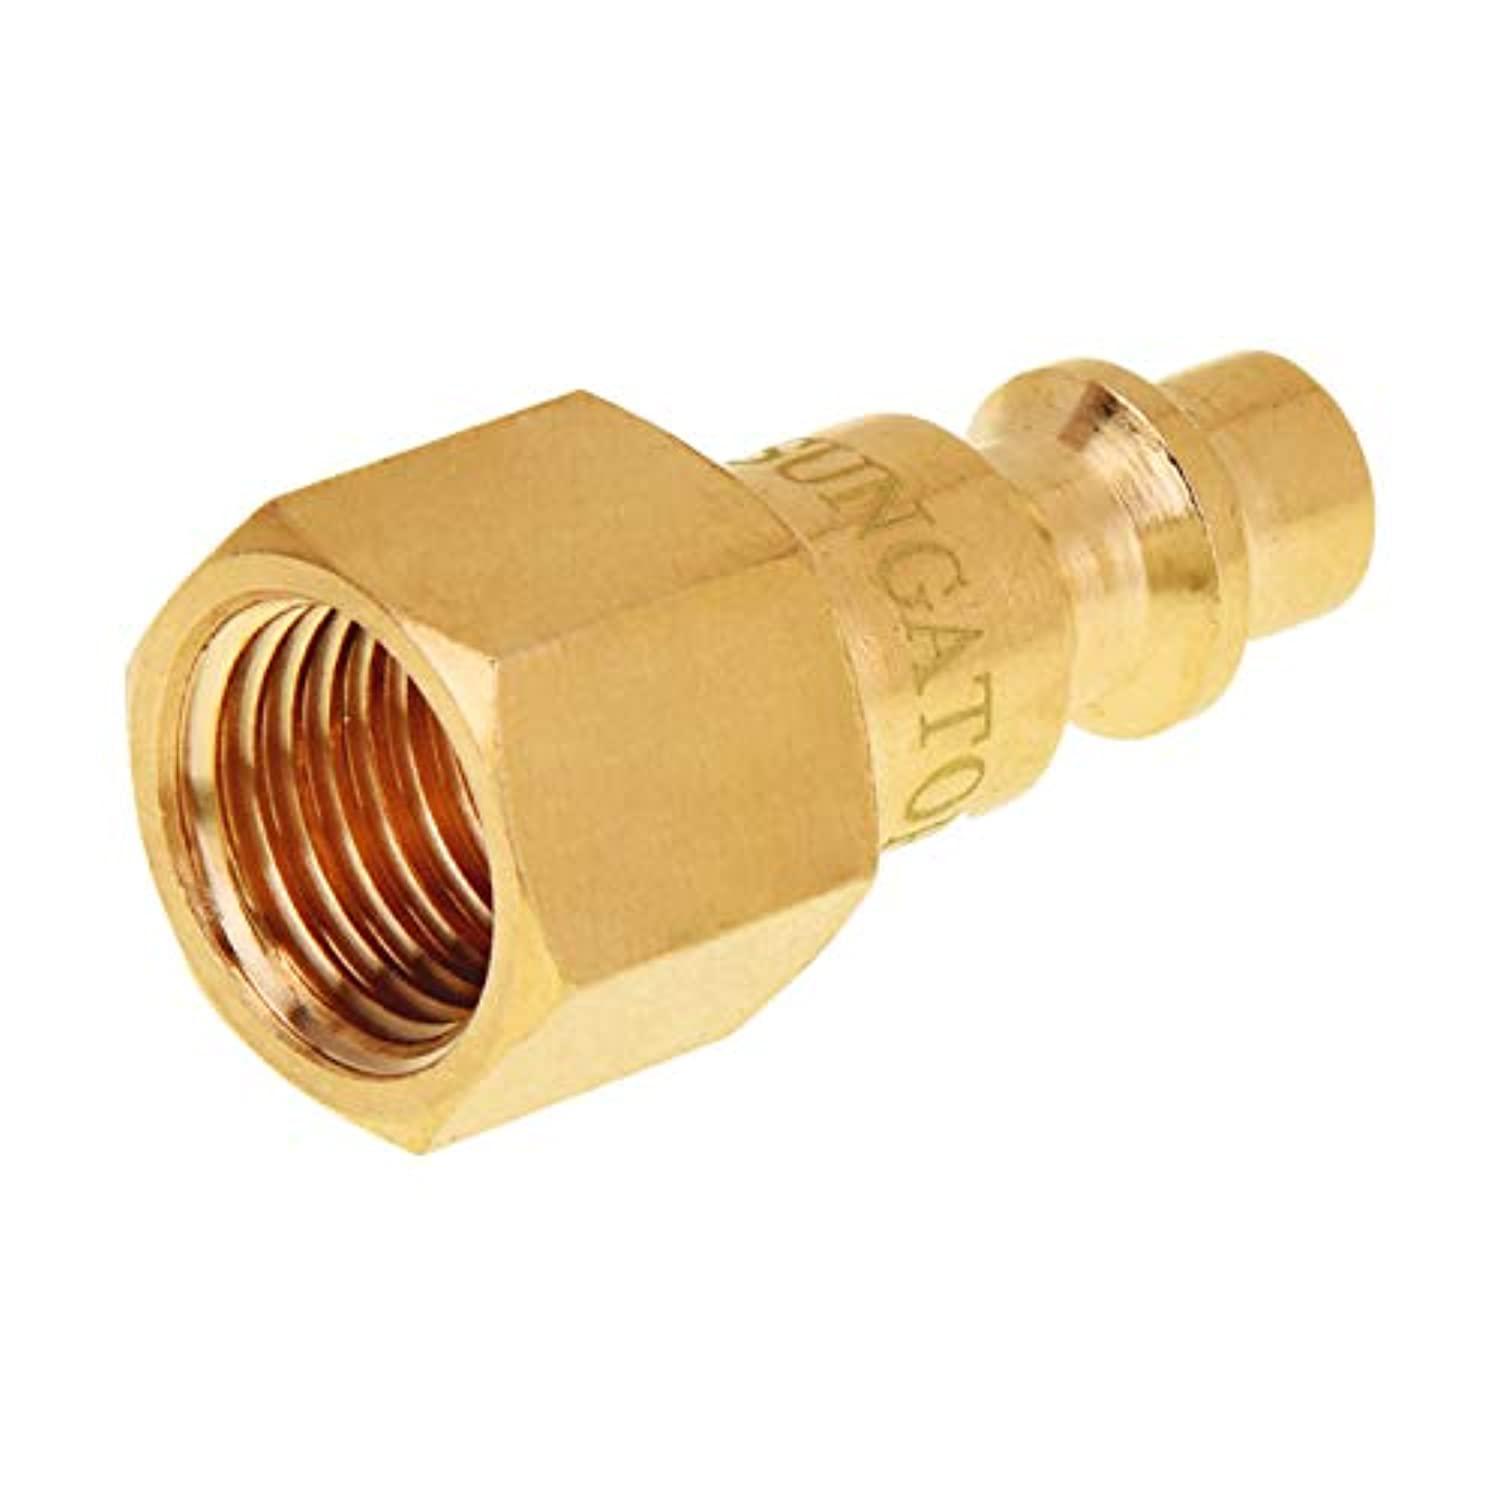 sungator air coupler and plug kit, quick connector air fittings, 1/4 inch npt industrial brass air hose fitting (8-piece)